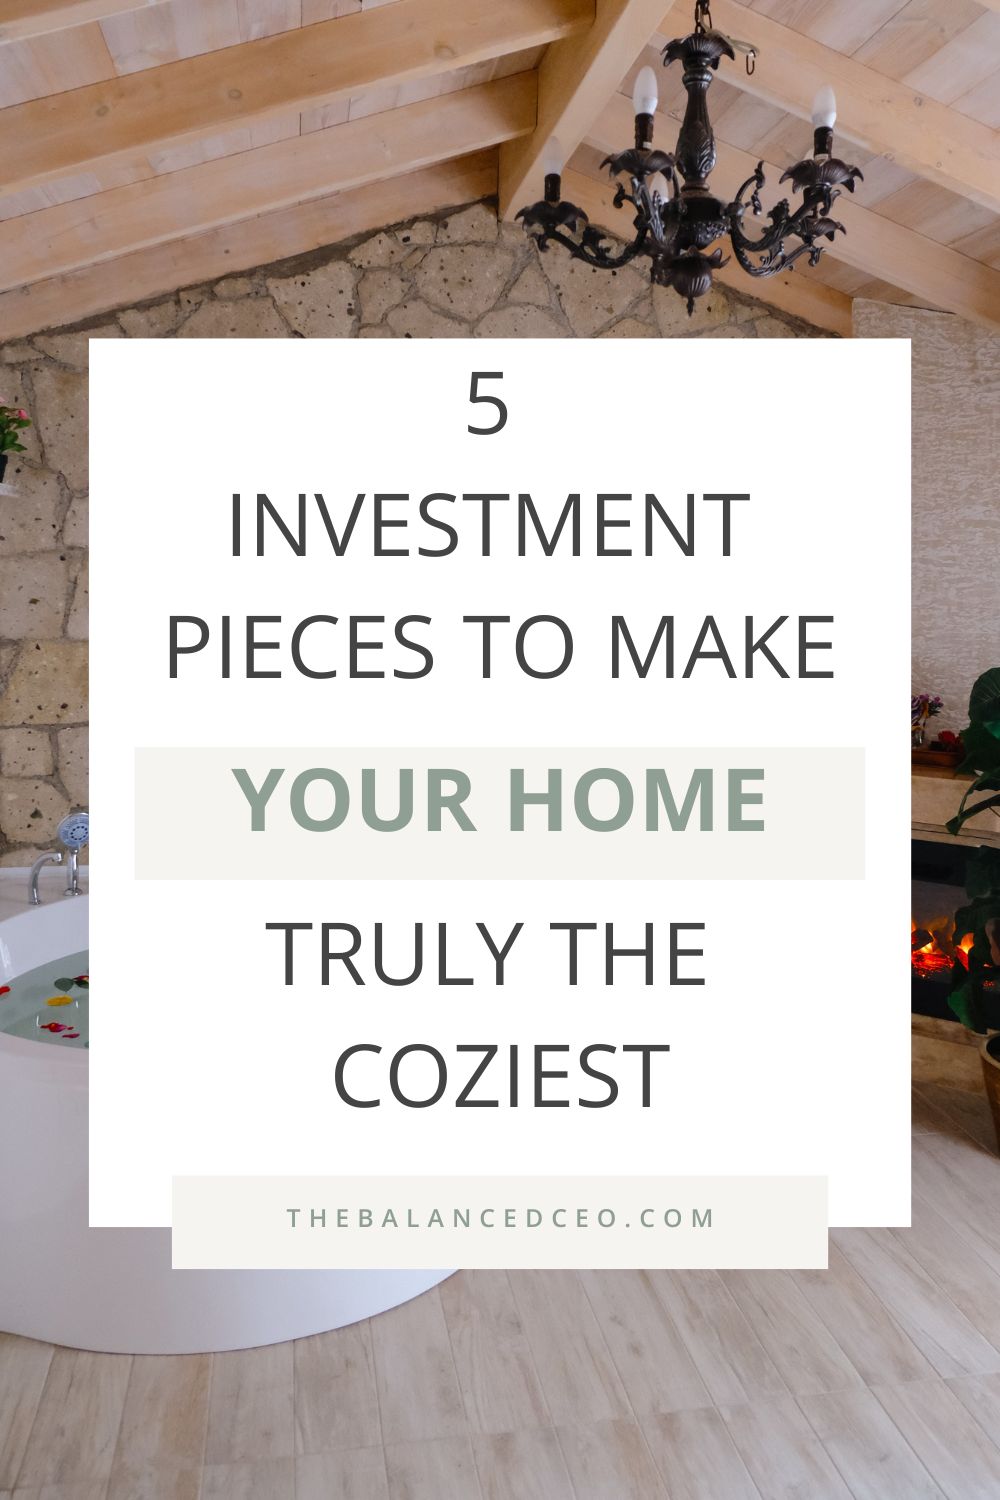 5 Investment Pieces to Make Your Home Truly the Coziest